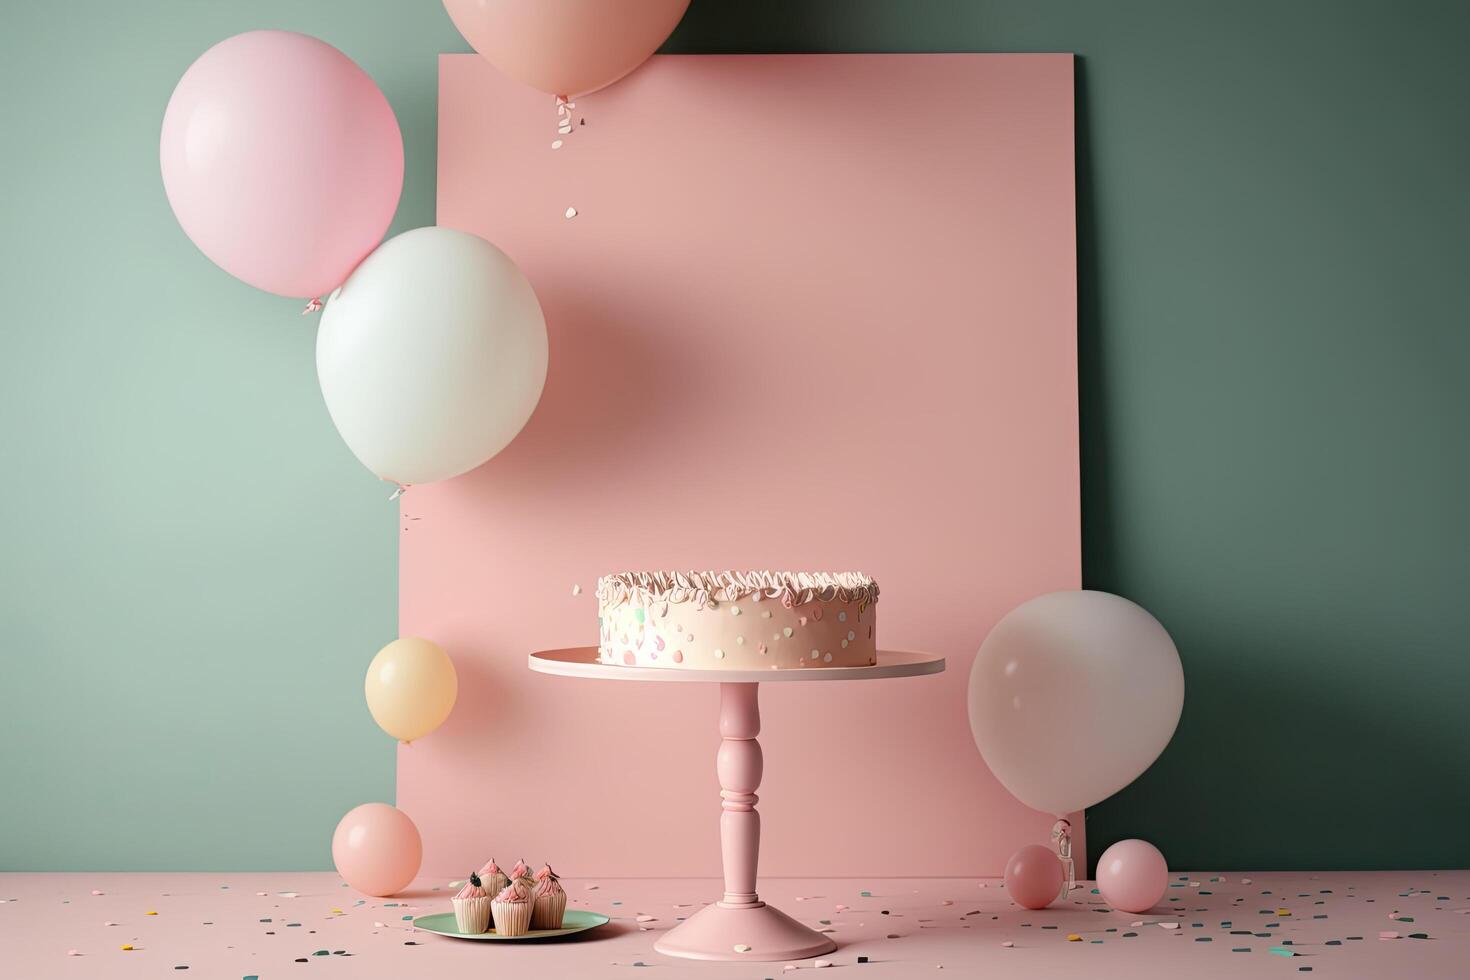 Pastel pink table with balloon frame and birthday confetti. Illustration photo